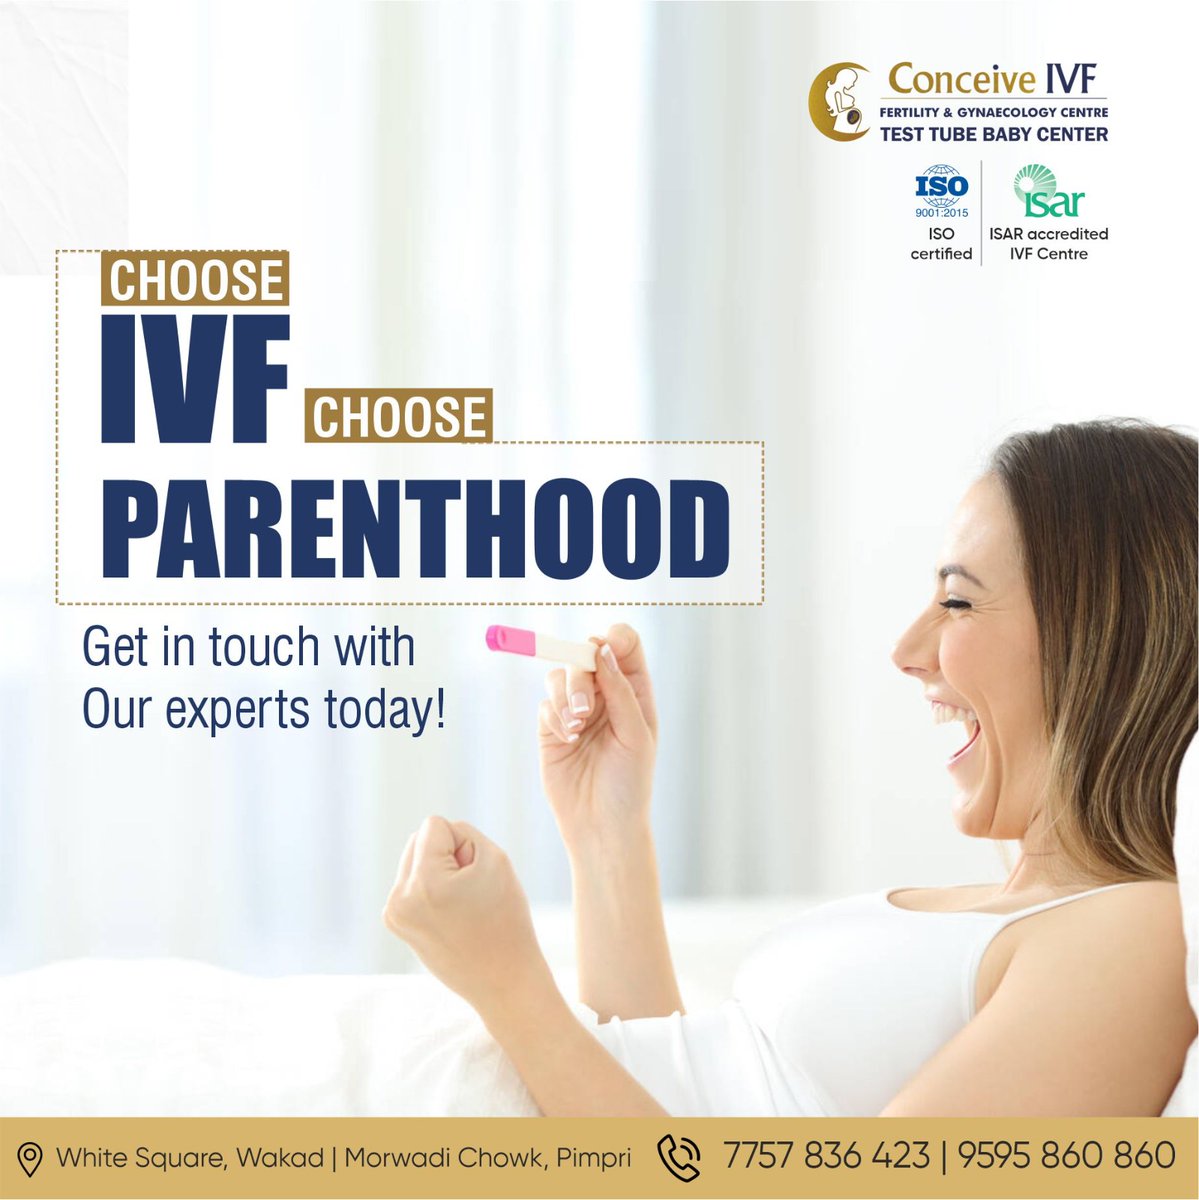 Conceive IVF is your destination for advanced and comprehensive care for infertility and other reproductive endocrinology problems.

#ConceiveIVF #InfertilitySupport #punetimesmirror #GynecologicalHealth #ivf #fertilitytreatment #womenhealth #pune